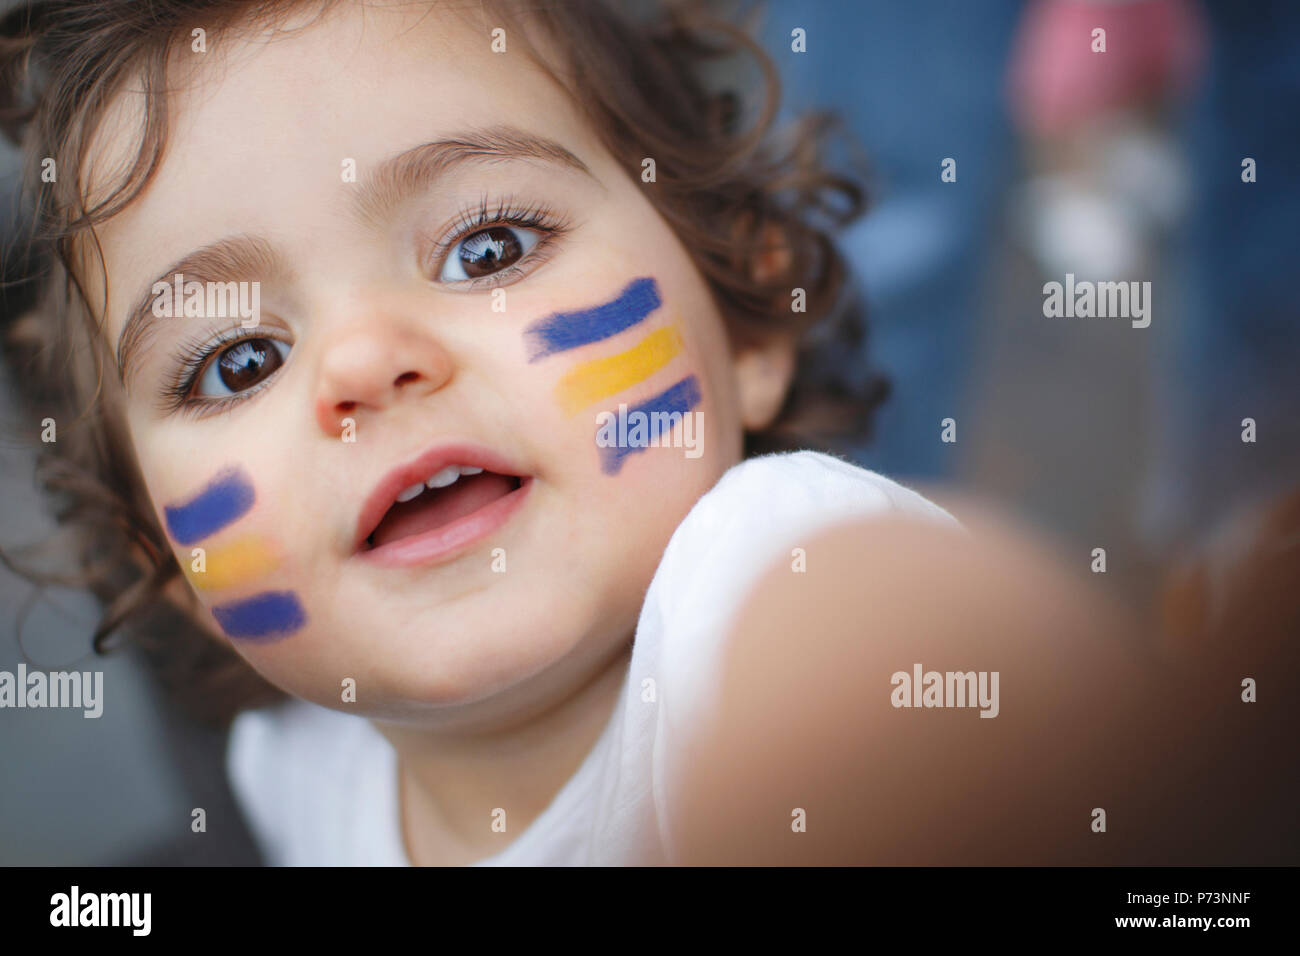 Kid fan with blue and yellow flag painted on face Stock Photo